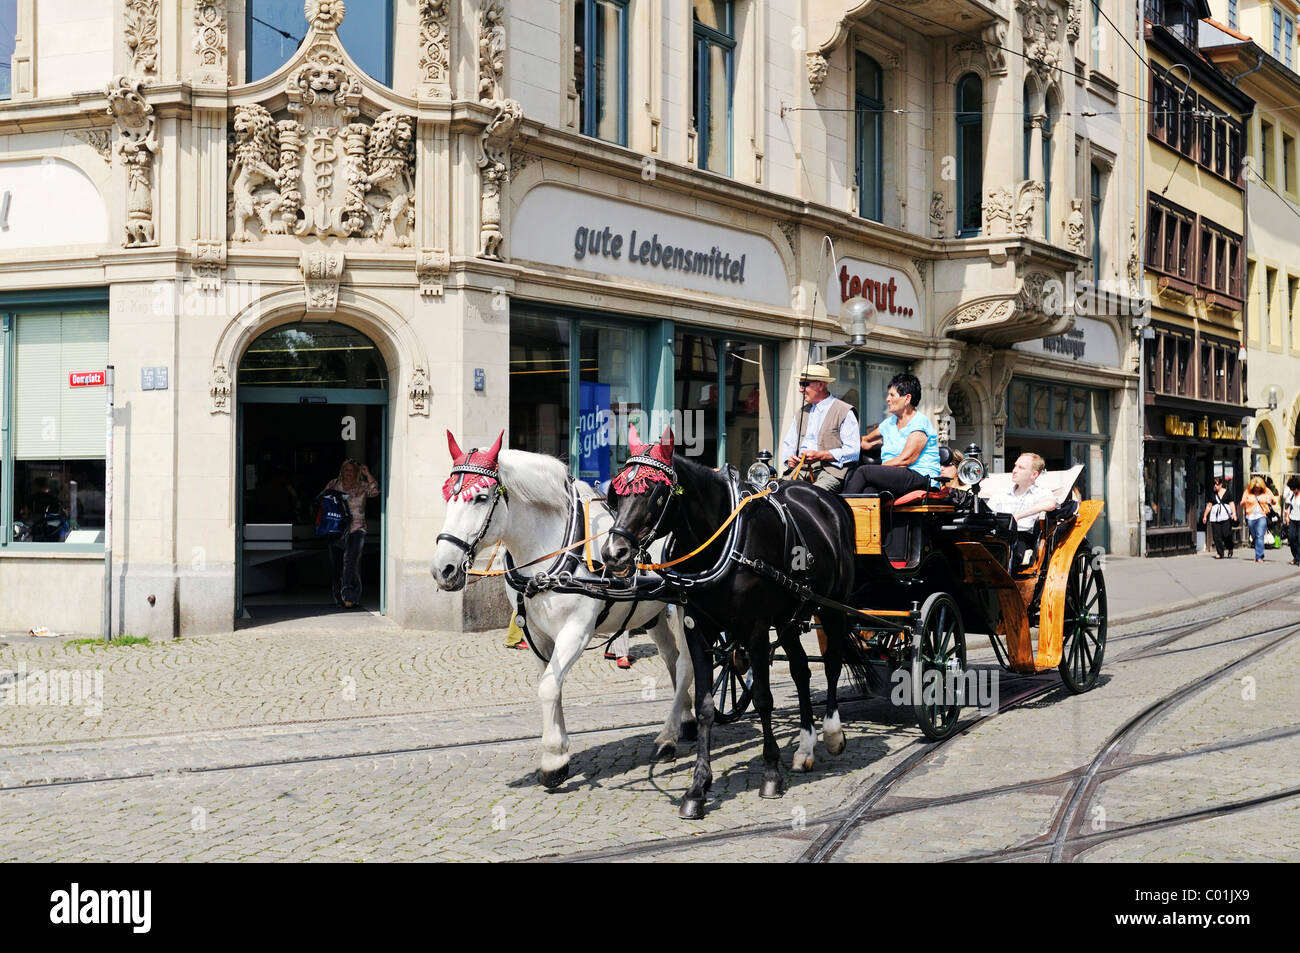 Horse-drawn carriage for tourists, Domplatz cathedral square, Erfurt, Thuringia, Germany, Europe Stock Photo